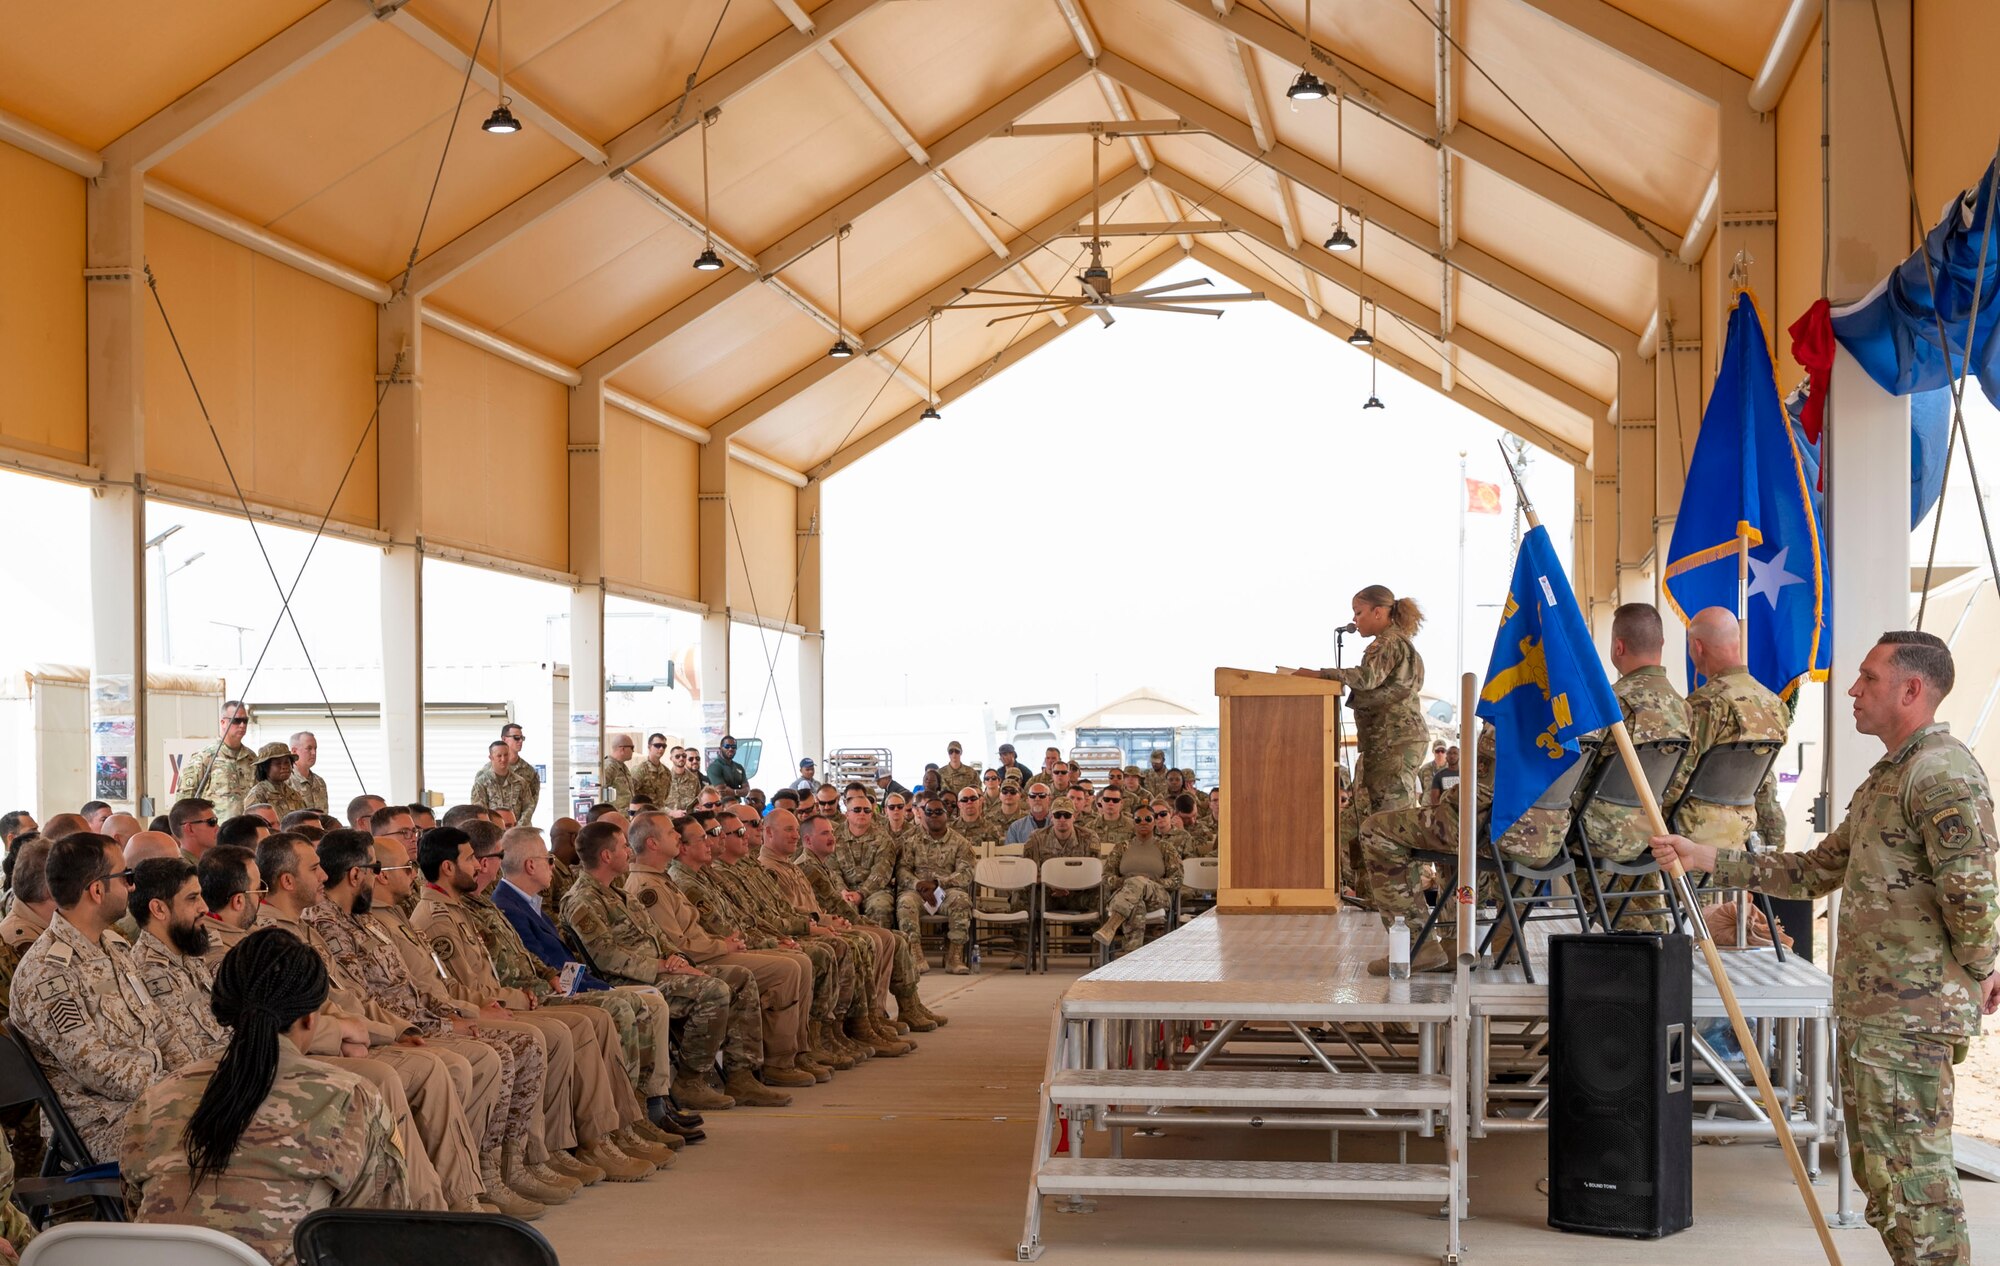 Service members from the Royal Saudi Air Force and 378th Air Expeditionary Wing listen to U.S. Air Force Master Sgt. Sarah Hahn, 378th AEW Equal Opportunity director, narrate during a change of command ceremony at Prince Sultan Air Base, Kingdom of Saudi Arabia, May 18, 2023. During the ceremony, Brig. Gen. William Betts relinquished command of the 378th AEW to Brig. Gen. Akshai Gandhi. The tradition of change of command ceremonies are to allow service members to witness their new leader assume the responsibility and trust associated with the position of commander. (U.S. Air Force photo by Senior Airman Stephani Barge)